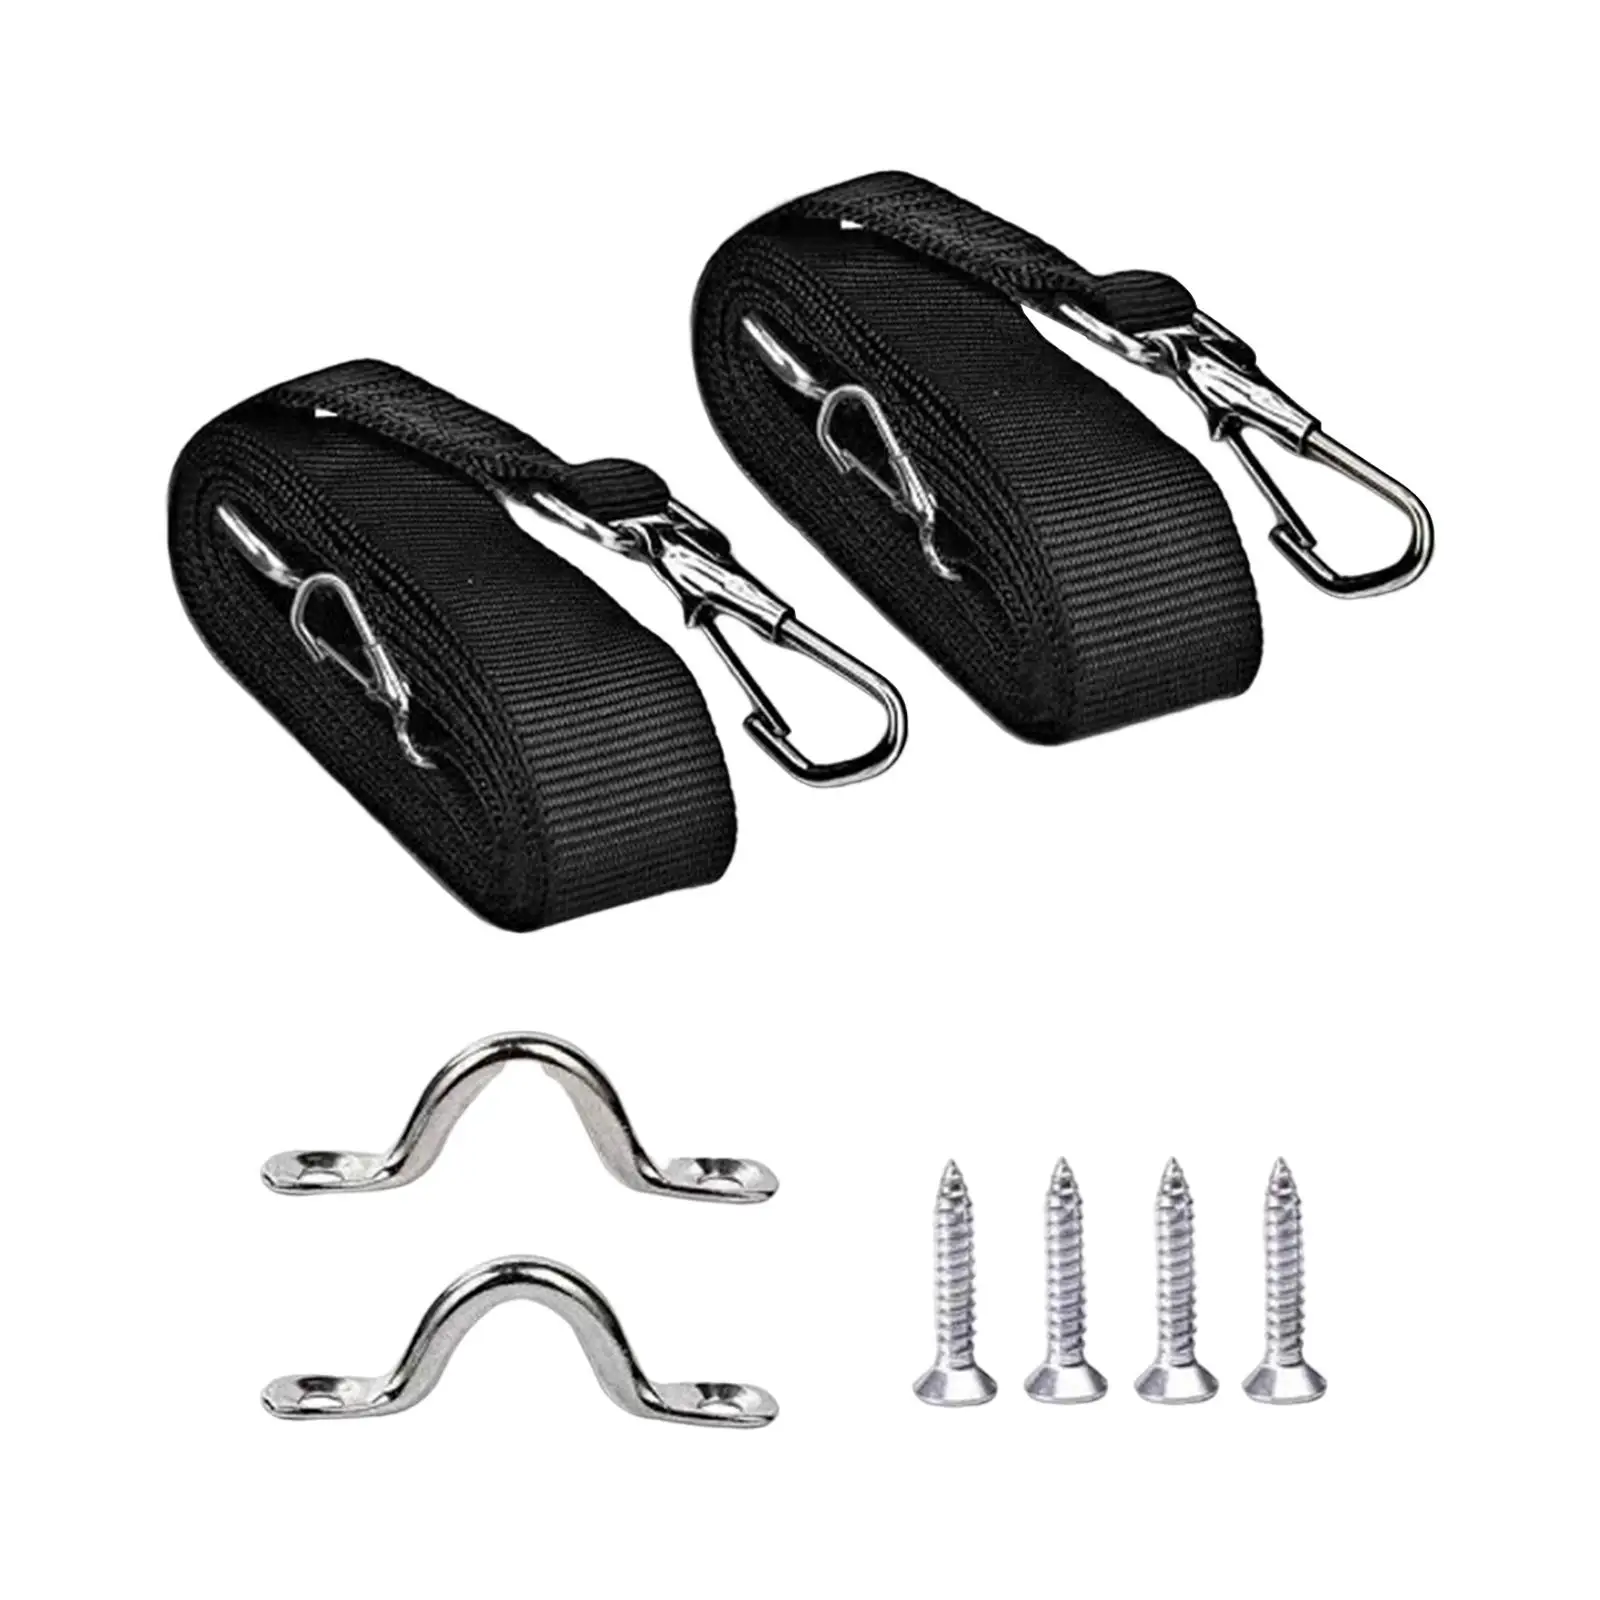 2Pcs Adjustable Bimini Top Straps Eye Straps with Loops Hook Boat Awning Hardware Accessories Boat Cover Straps for Boat